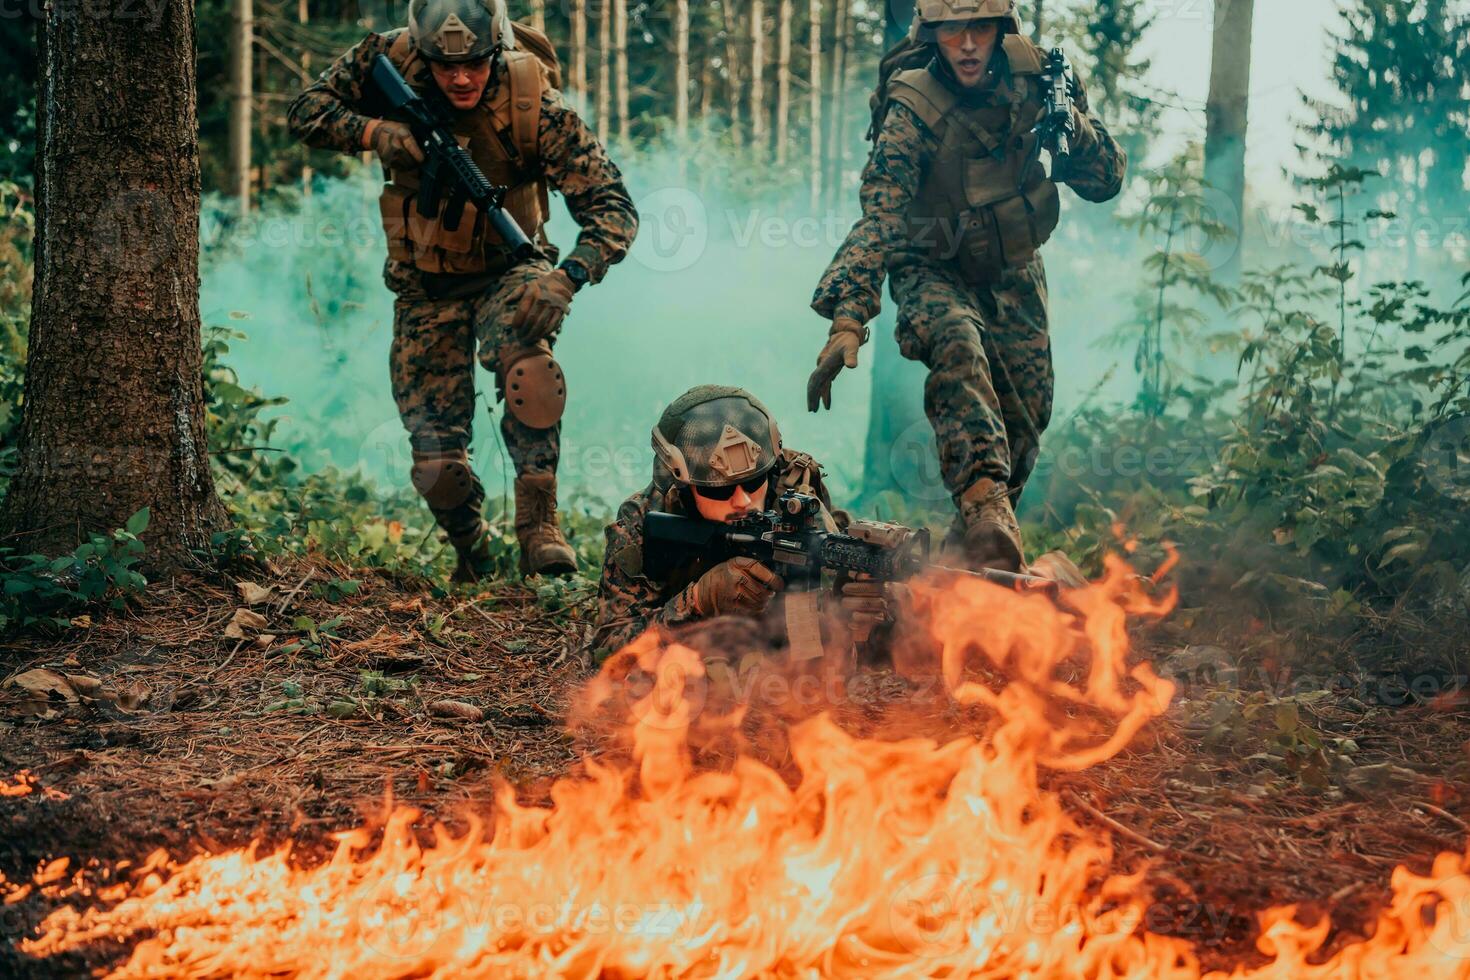 Modern warfare soldiers surrounded by fire fight in dense and dangerous forest areas photo